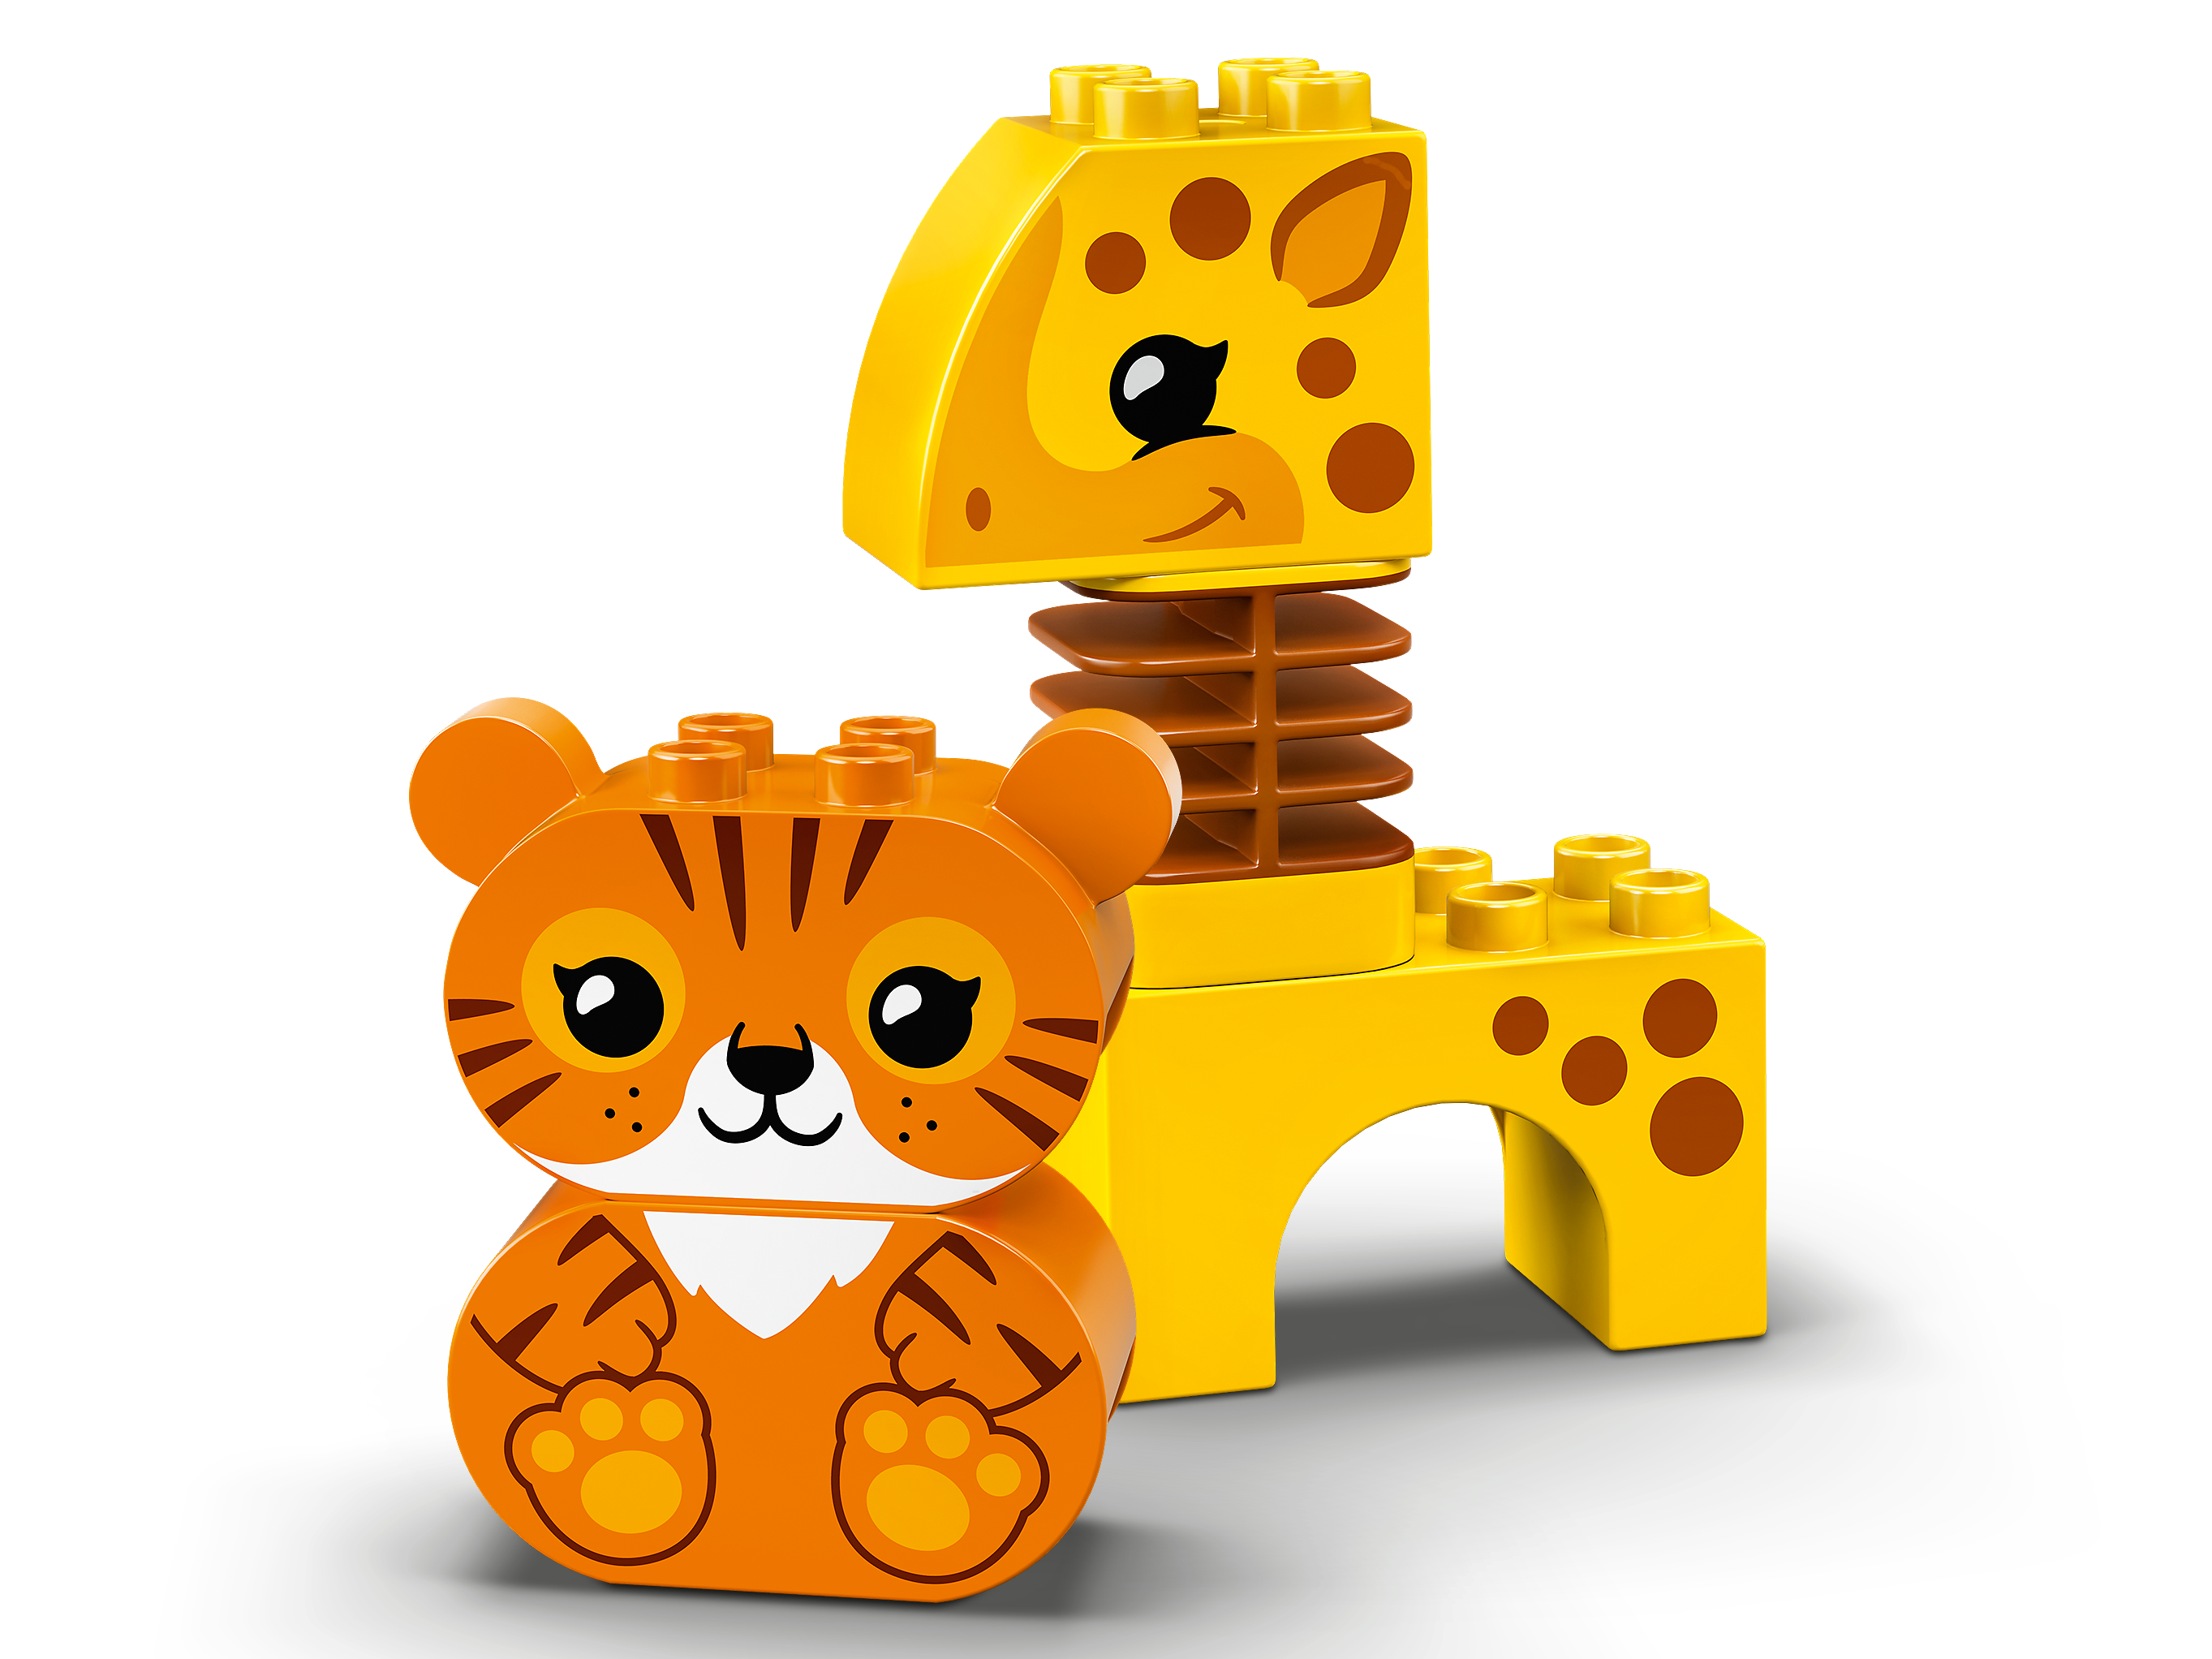 LEGO DUPLO My First Animal Train and Horse Toy 10412 6465036